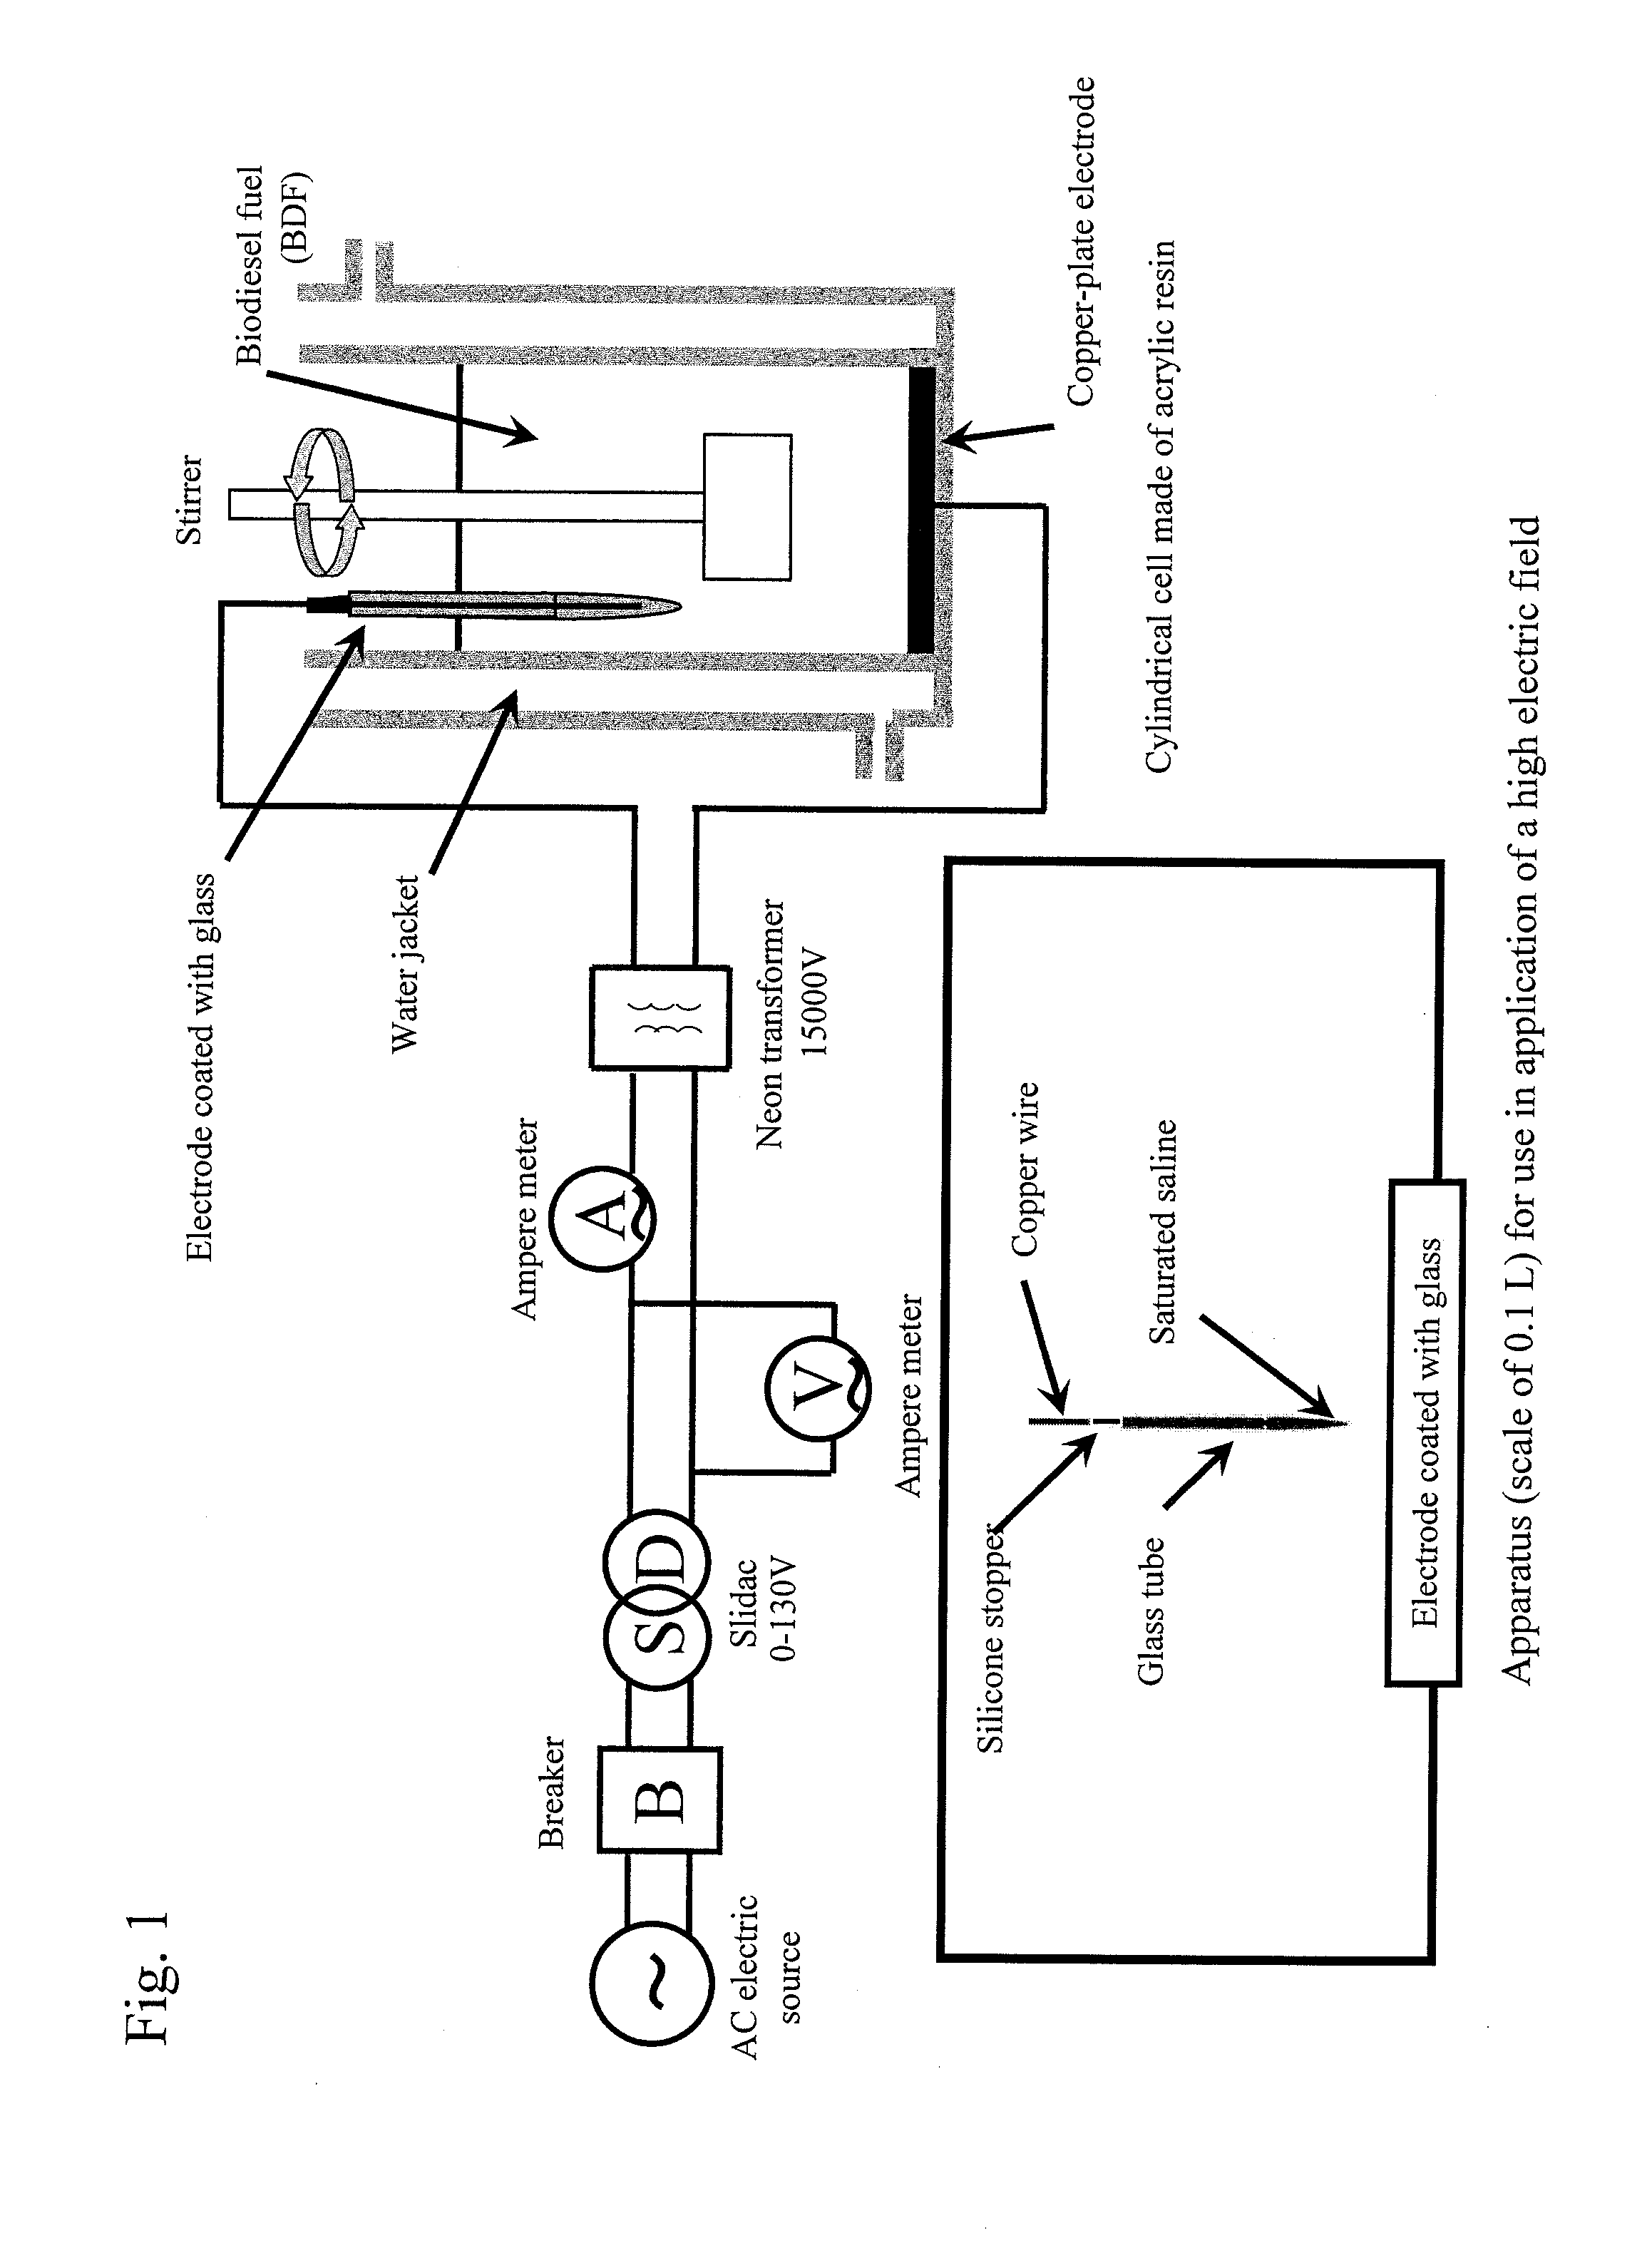 Method for purifying biodiesel fuel